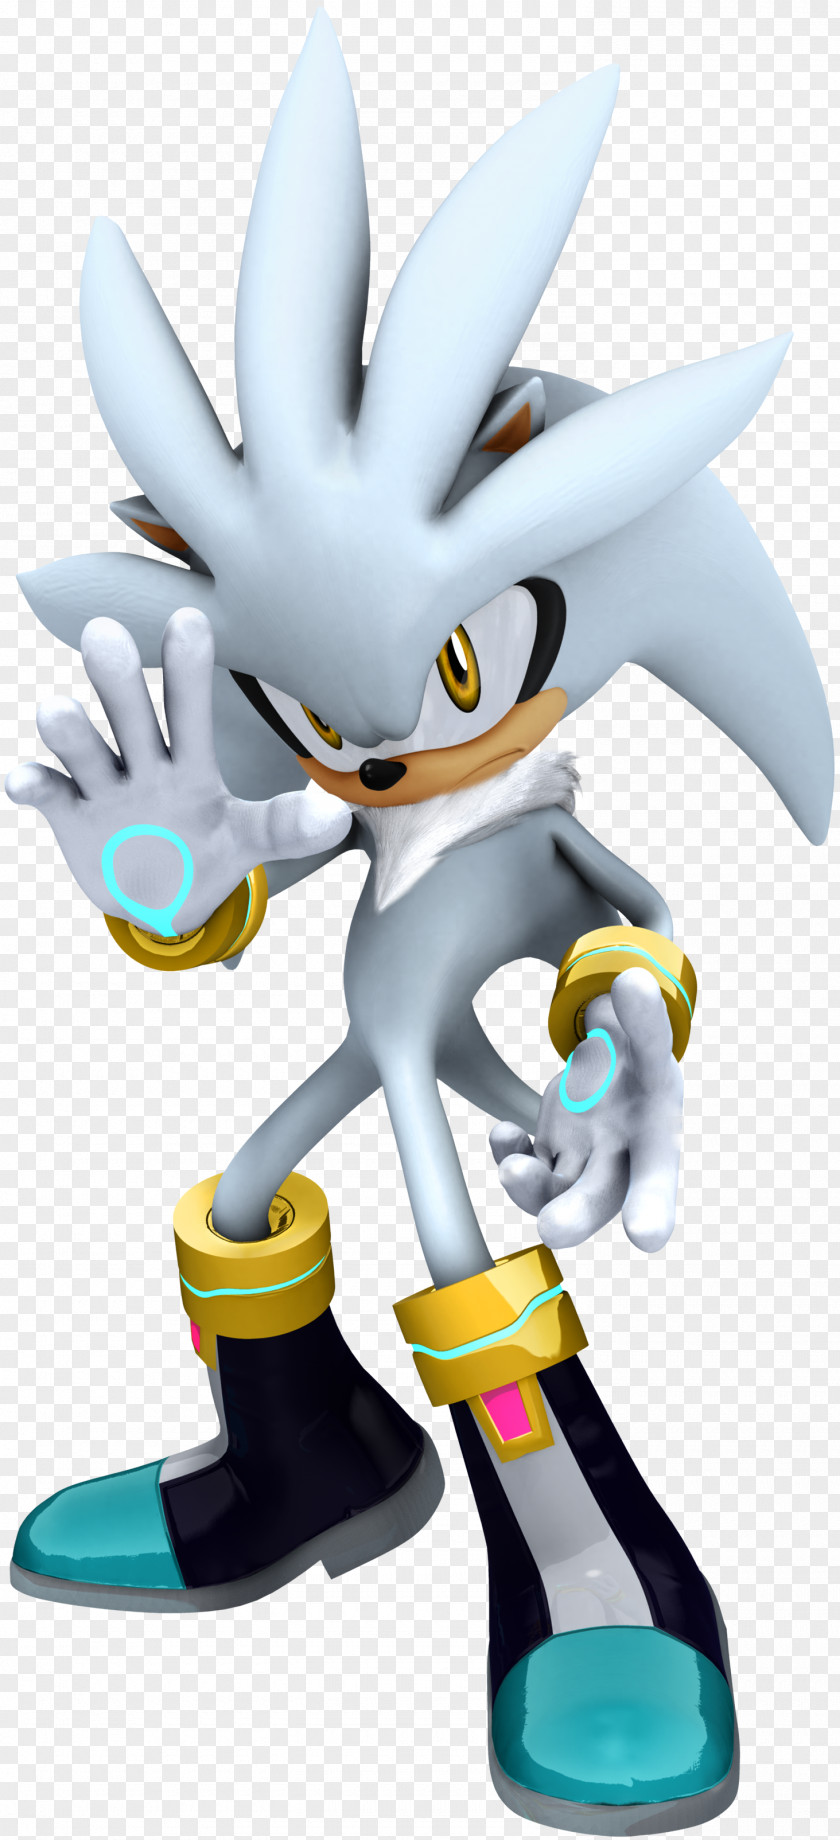 Silver Sonic The Hedgehog Unleashed & Knuckles Doctor Eggman Echidna PNG